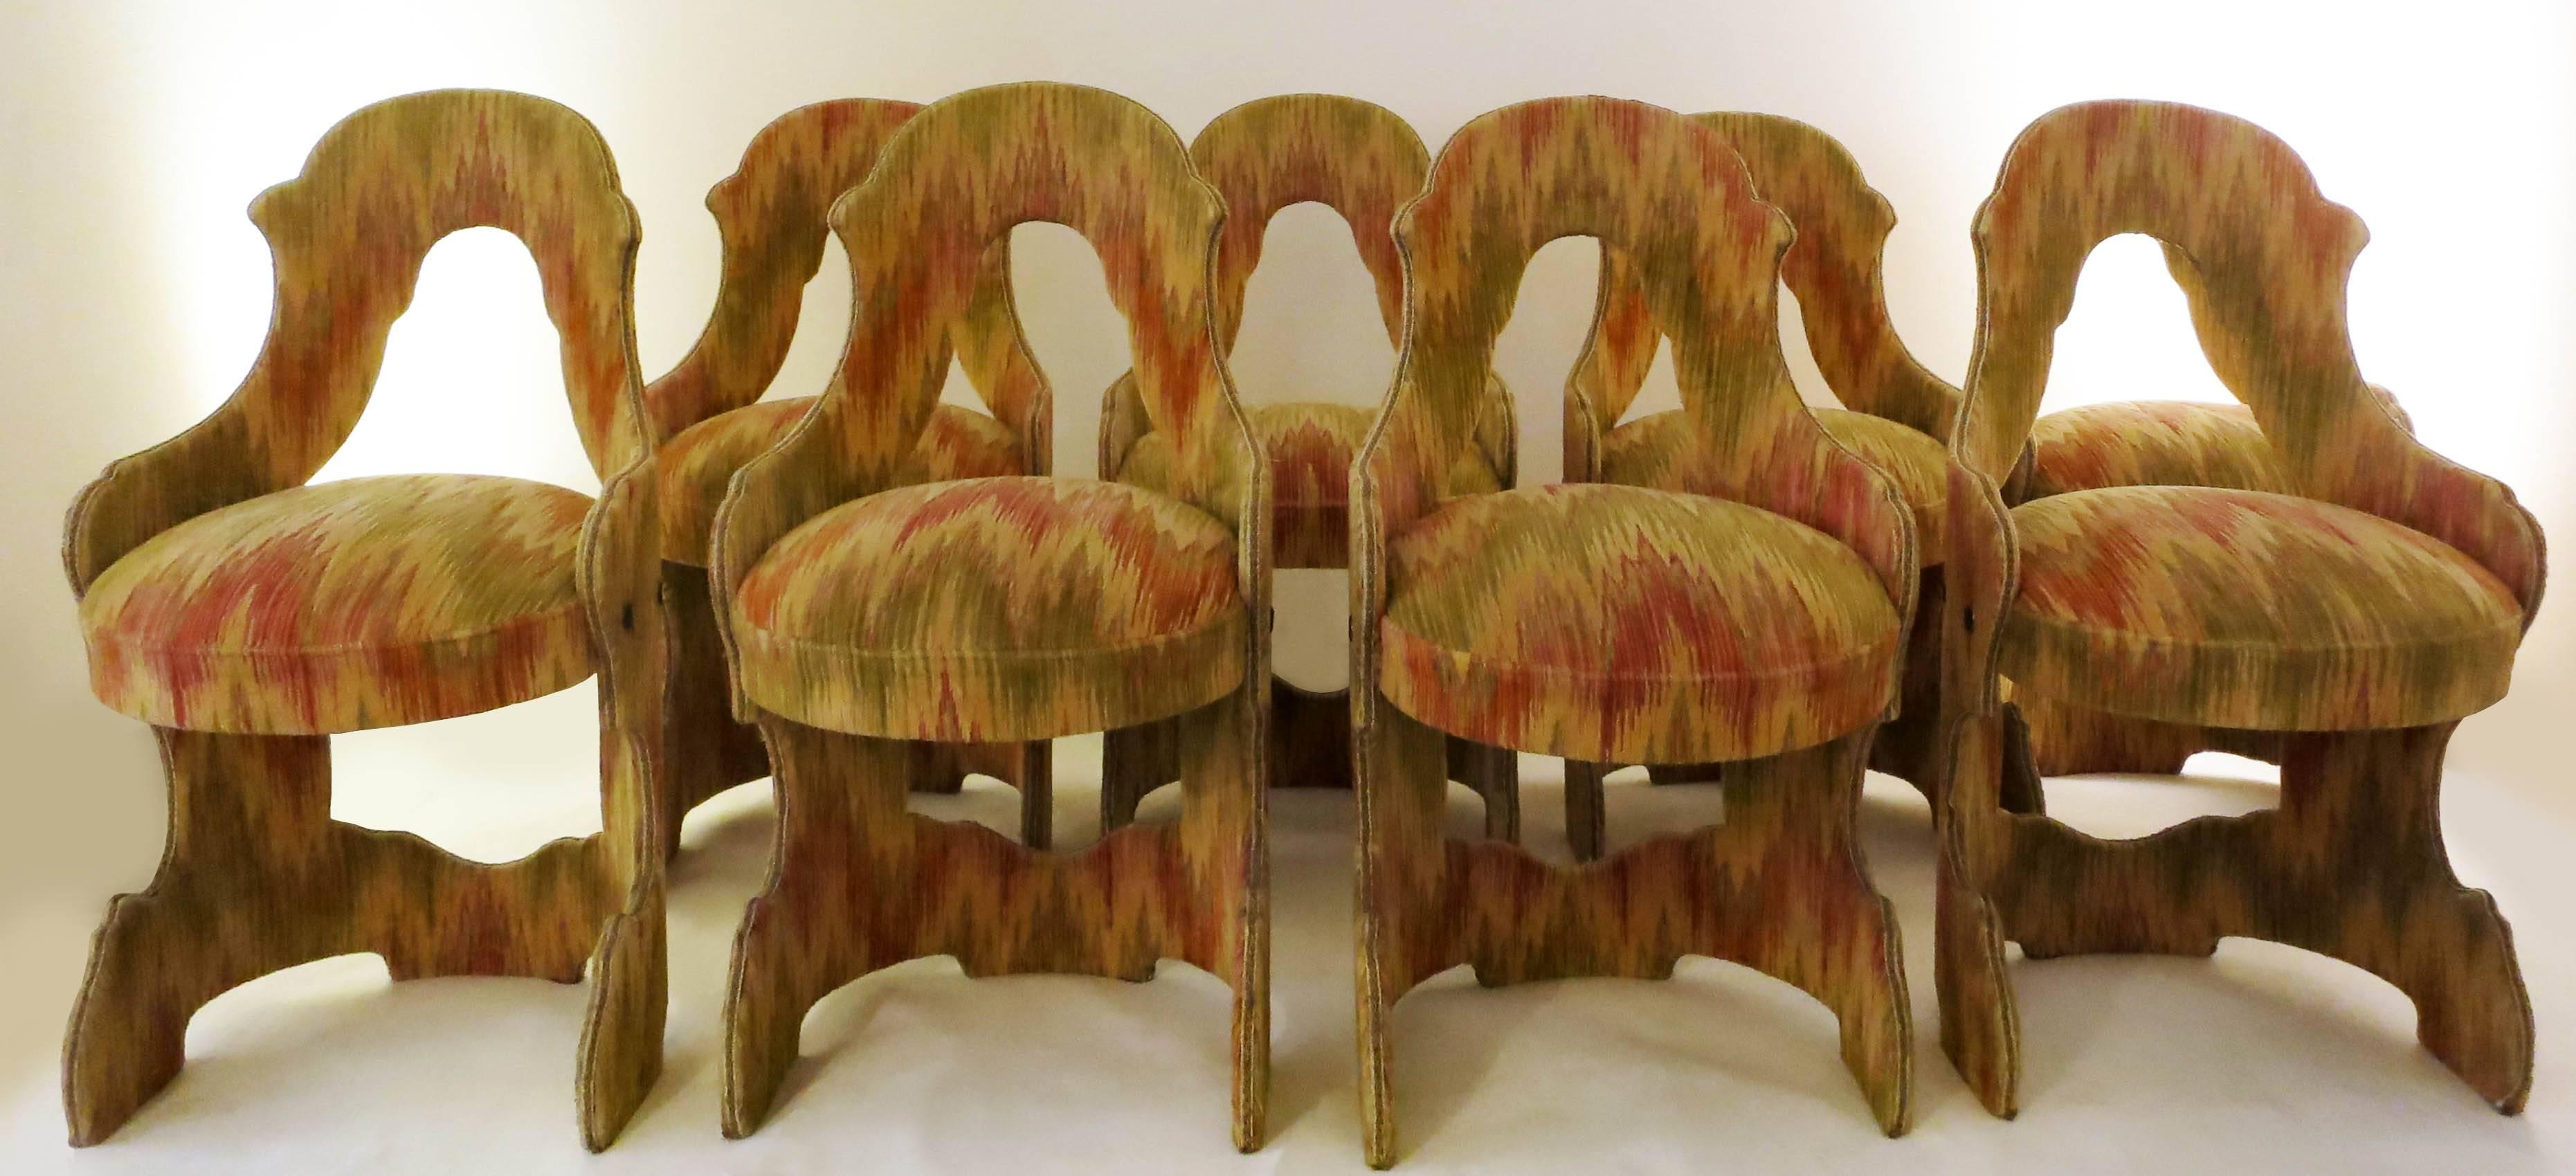 Amazing venitian dining chairs from the 1960s.
Set of eight.
Wood entirely covered with velvet.
Original velvet in very good condition.